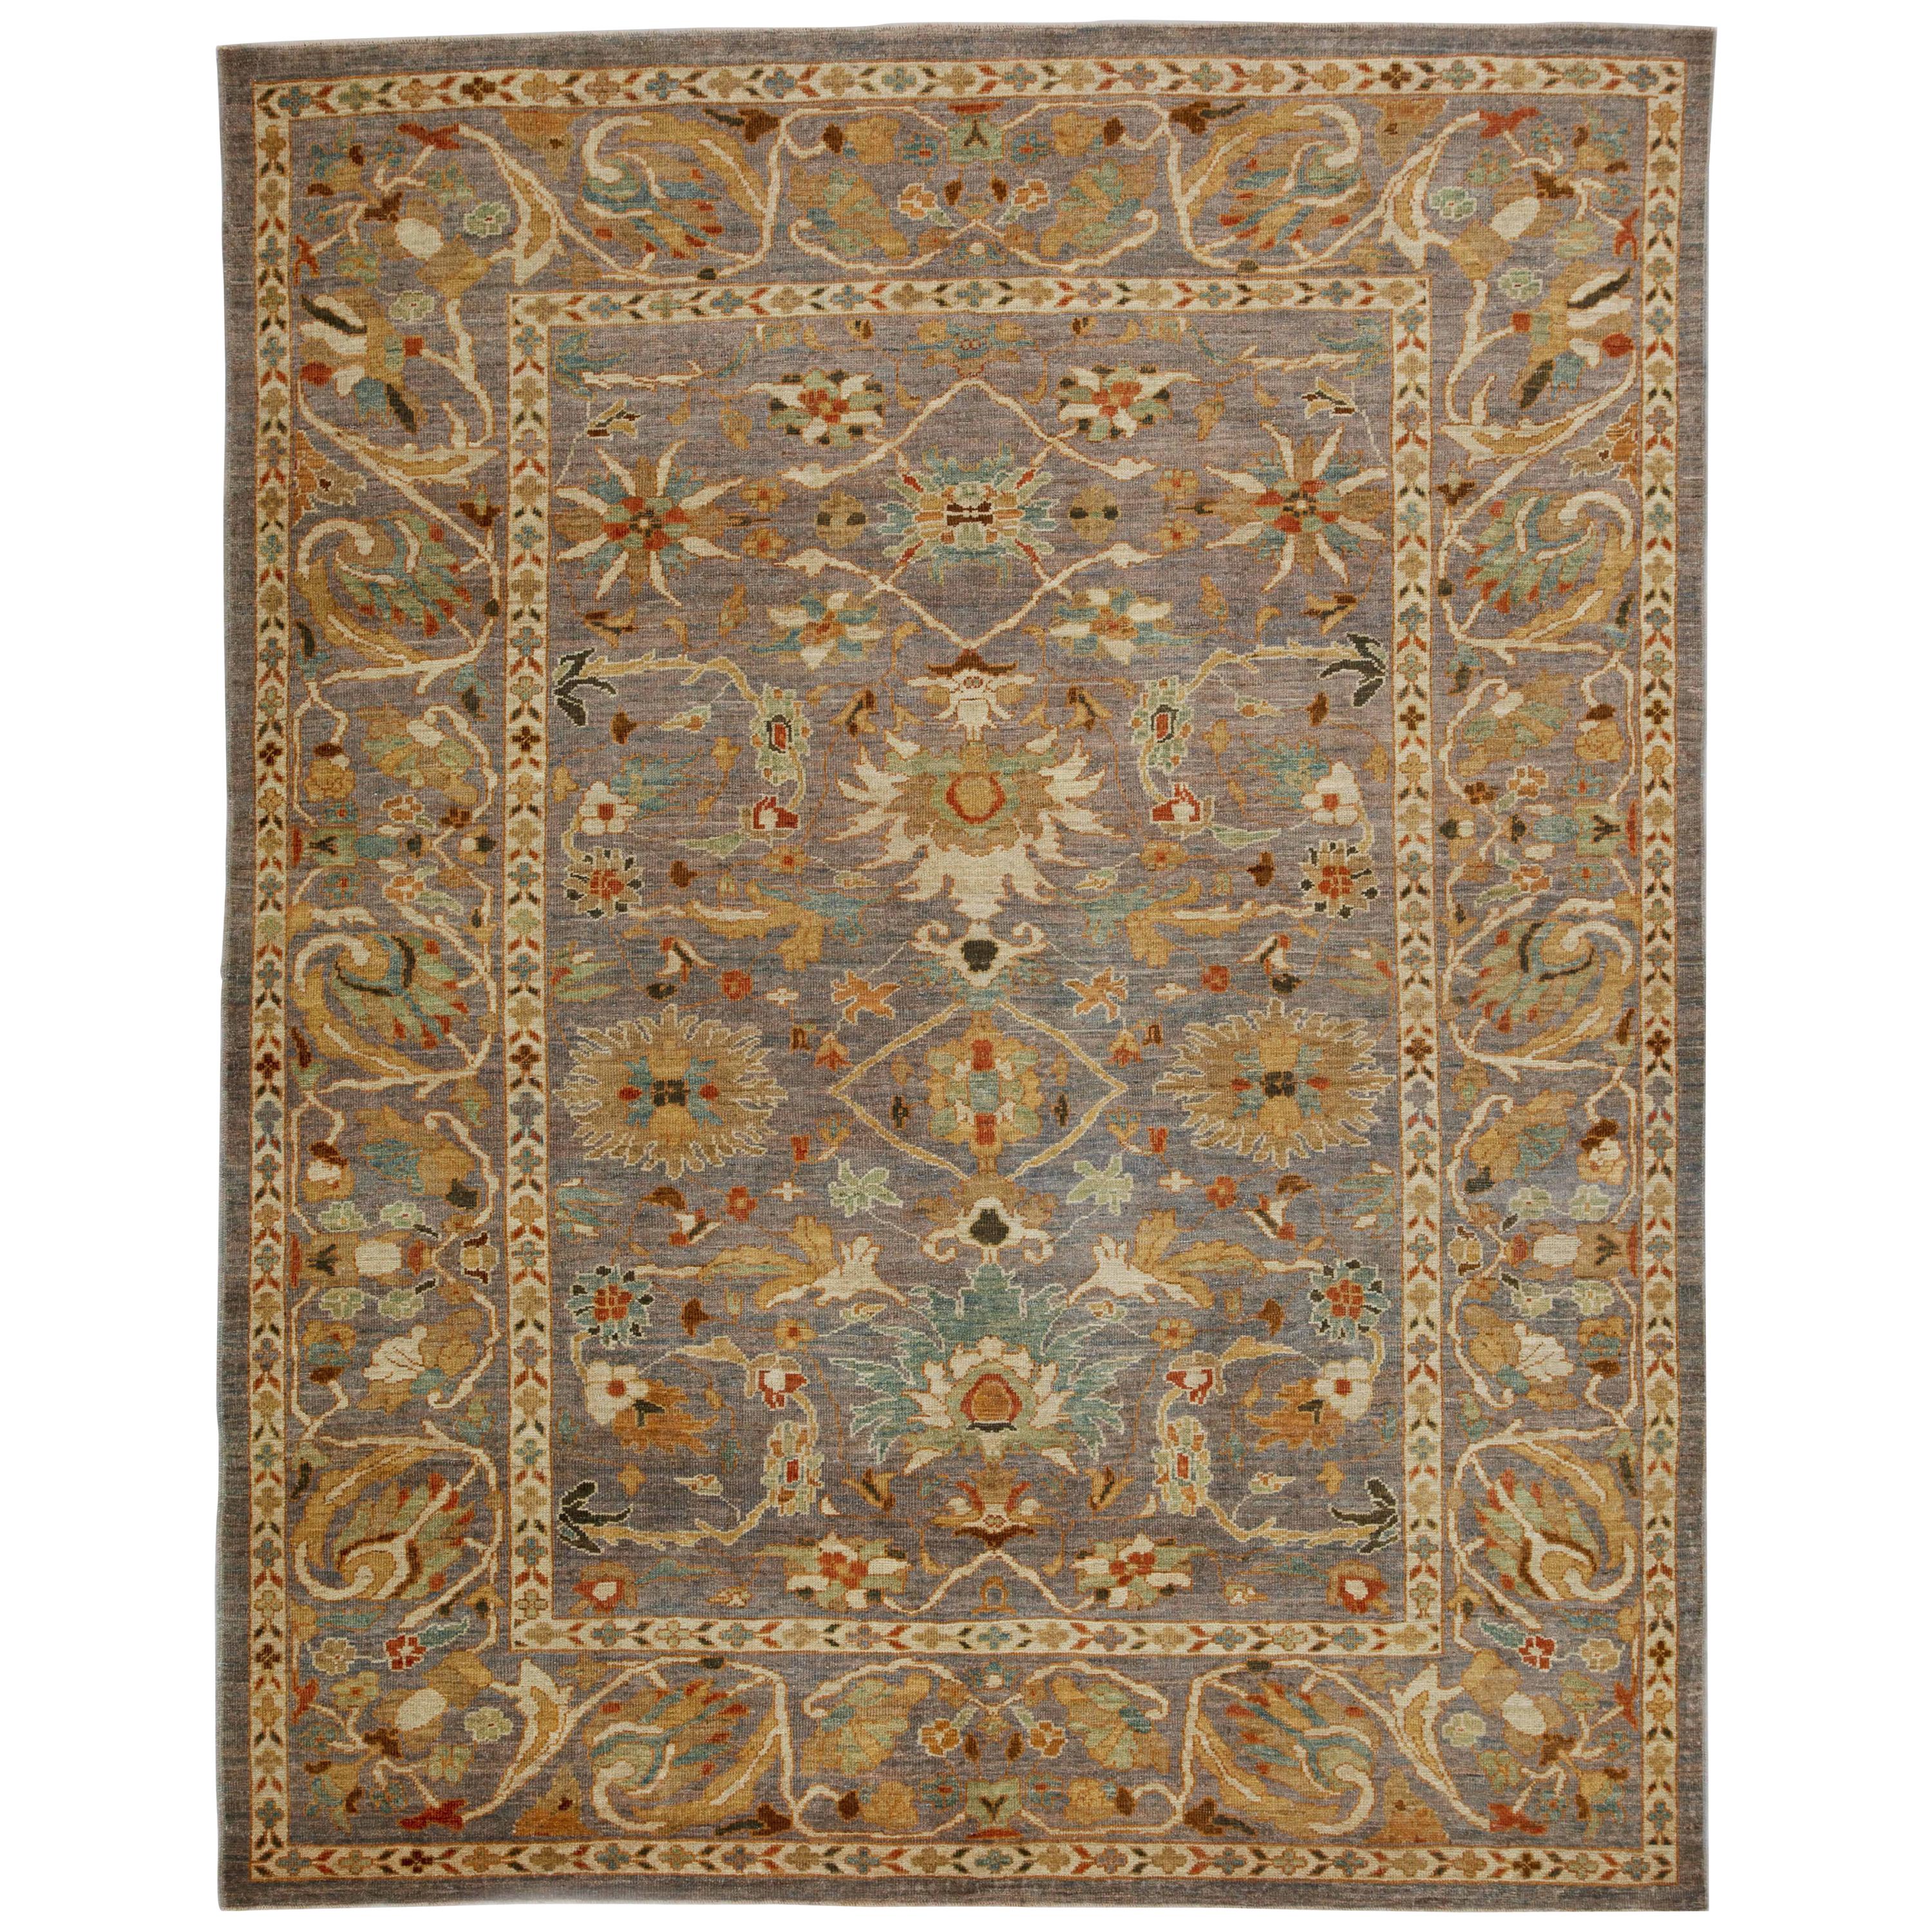 Modern Turkish Sultanabad Rug with Gray Field and Allover Floral Patterns